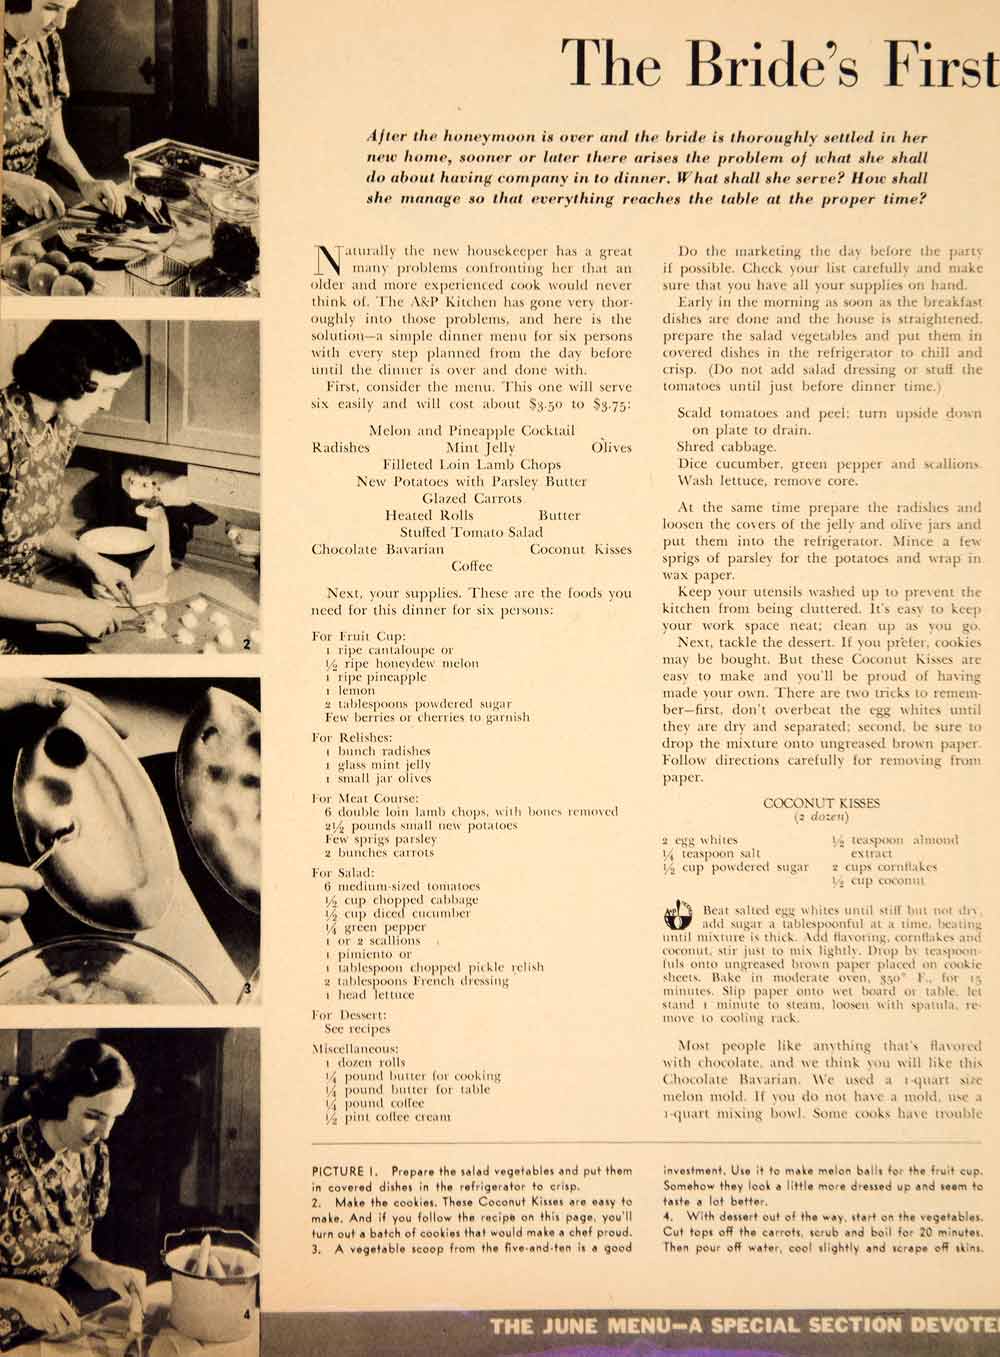 1938 Article Bride's First Dinner Menu Recipes Instructions Food Lamb Chops YWD3